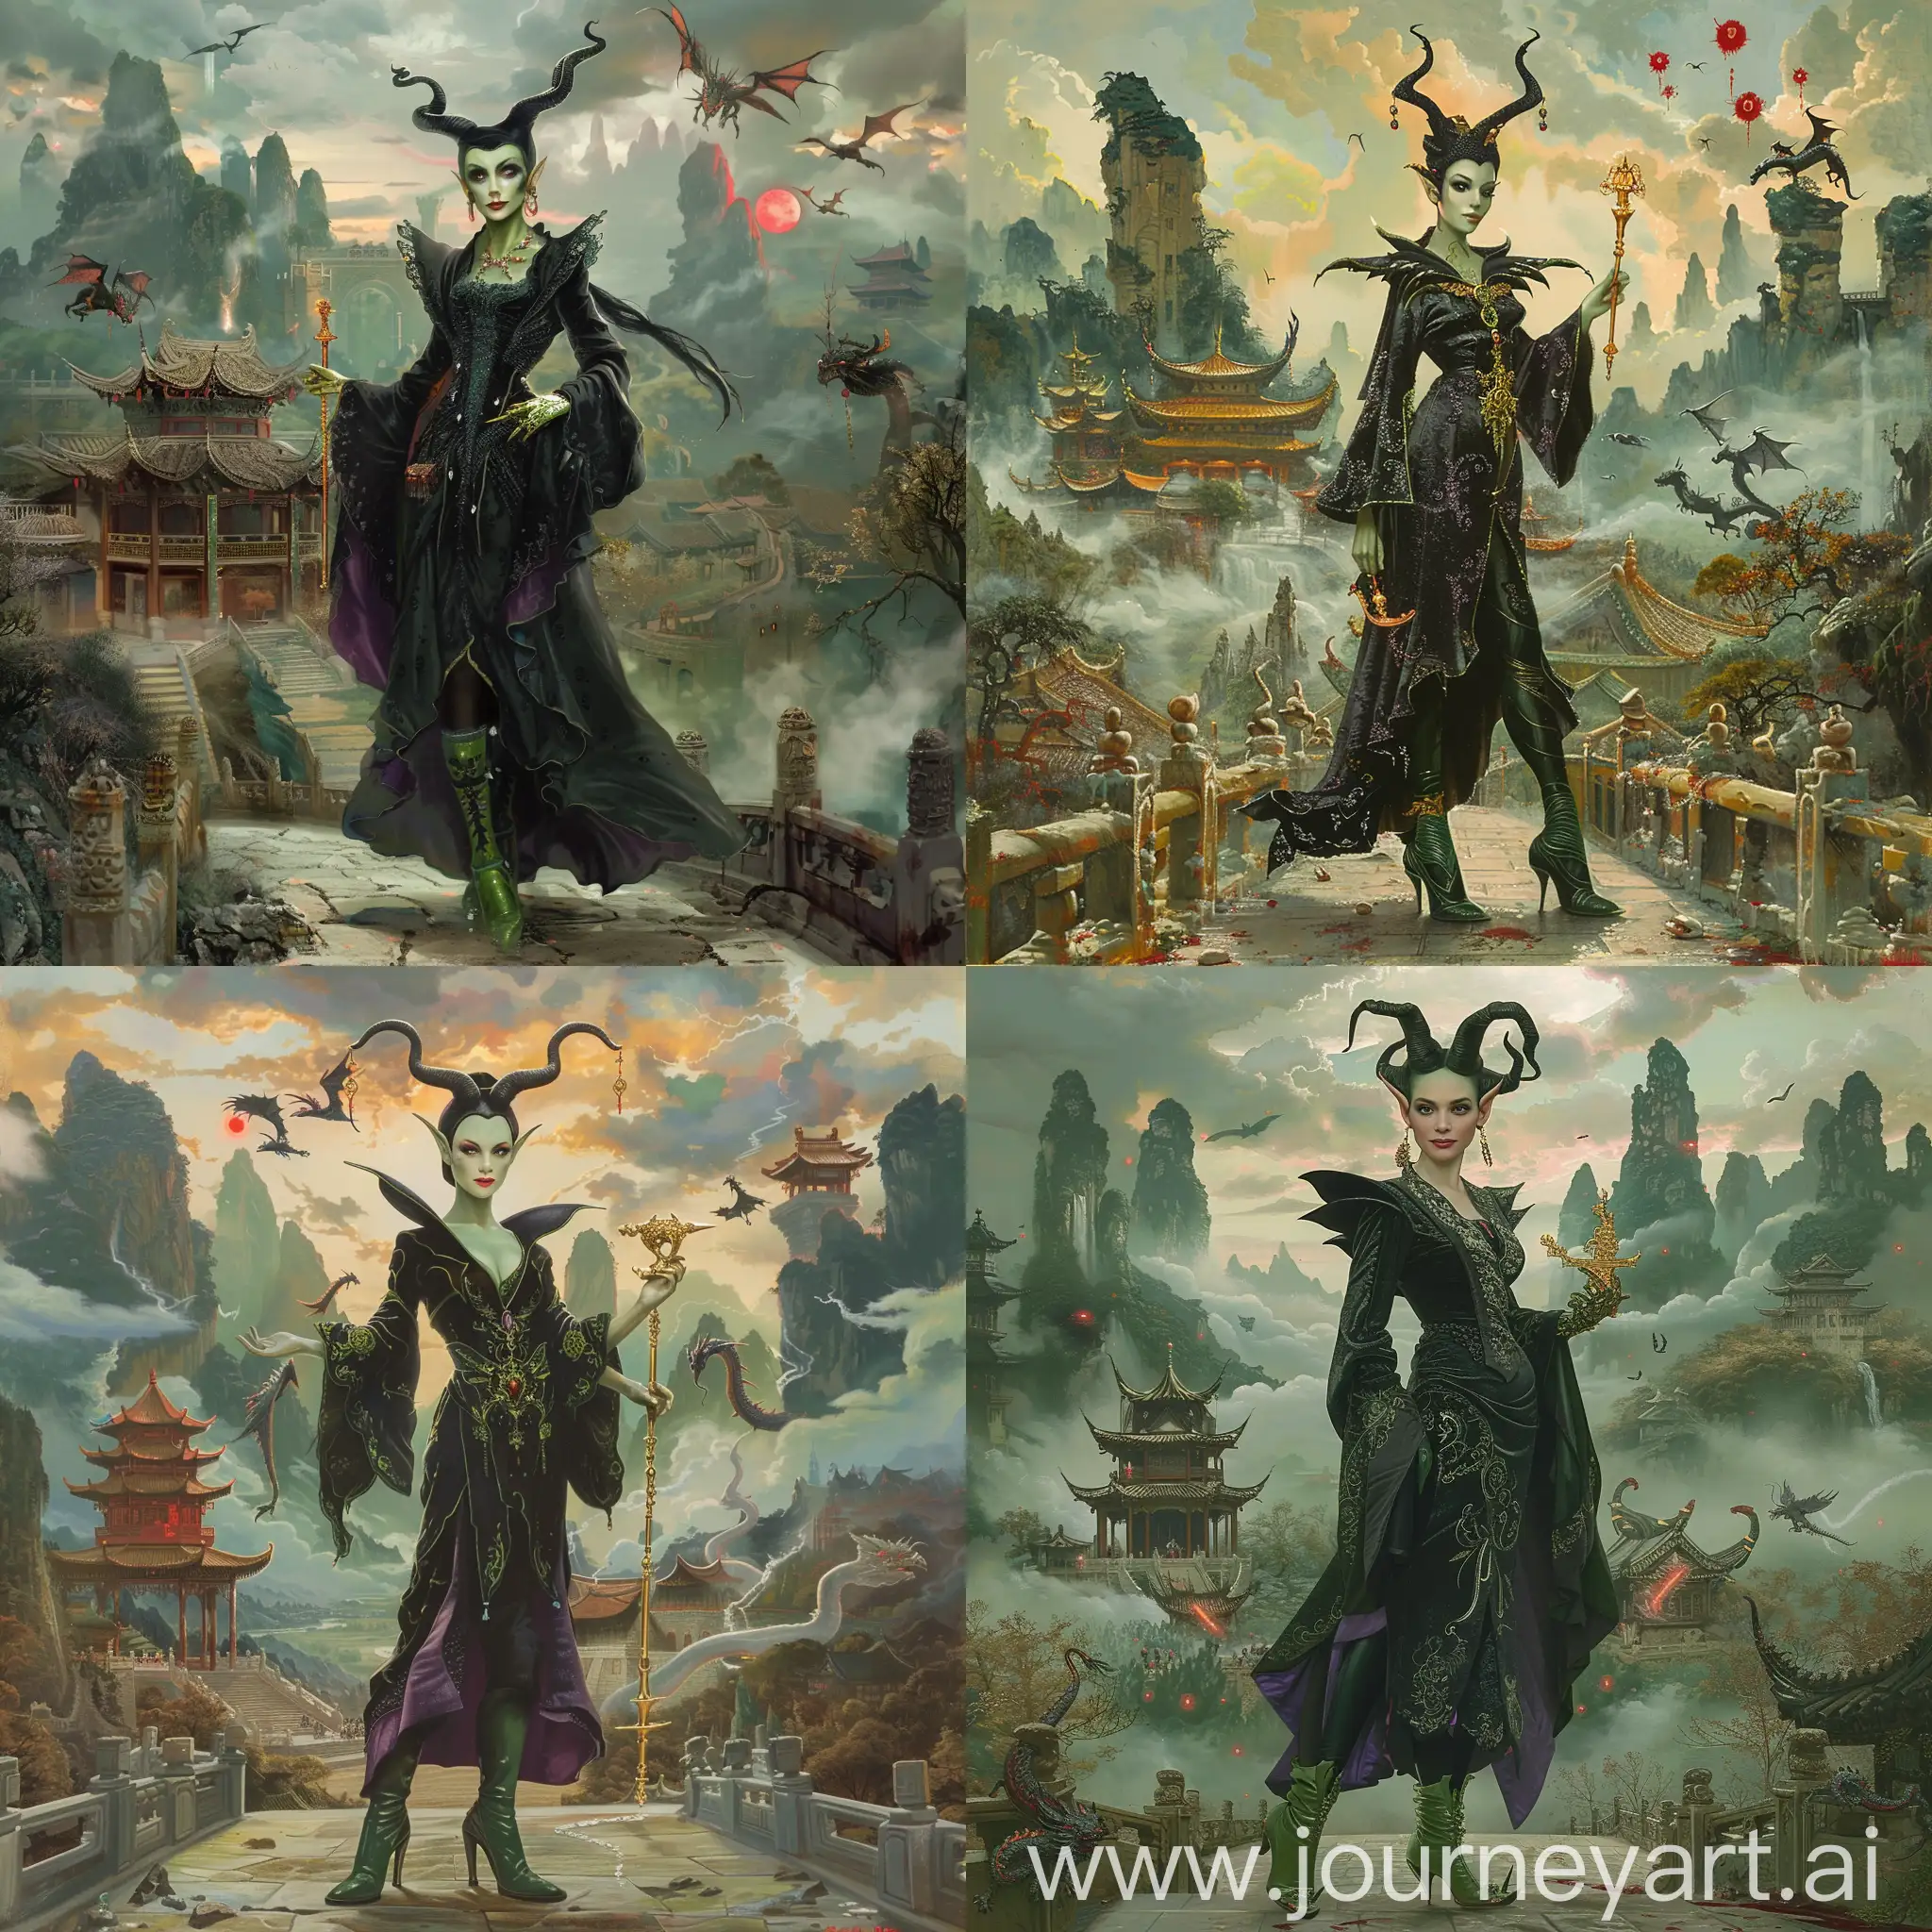 Maleficent-Elegant-Disney-Villain-with-Chinese-Influence-and-Dragons-in-Guilin-Mountains